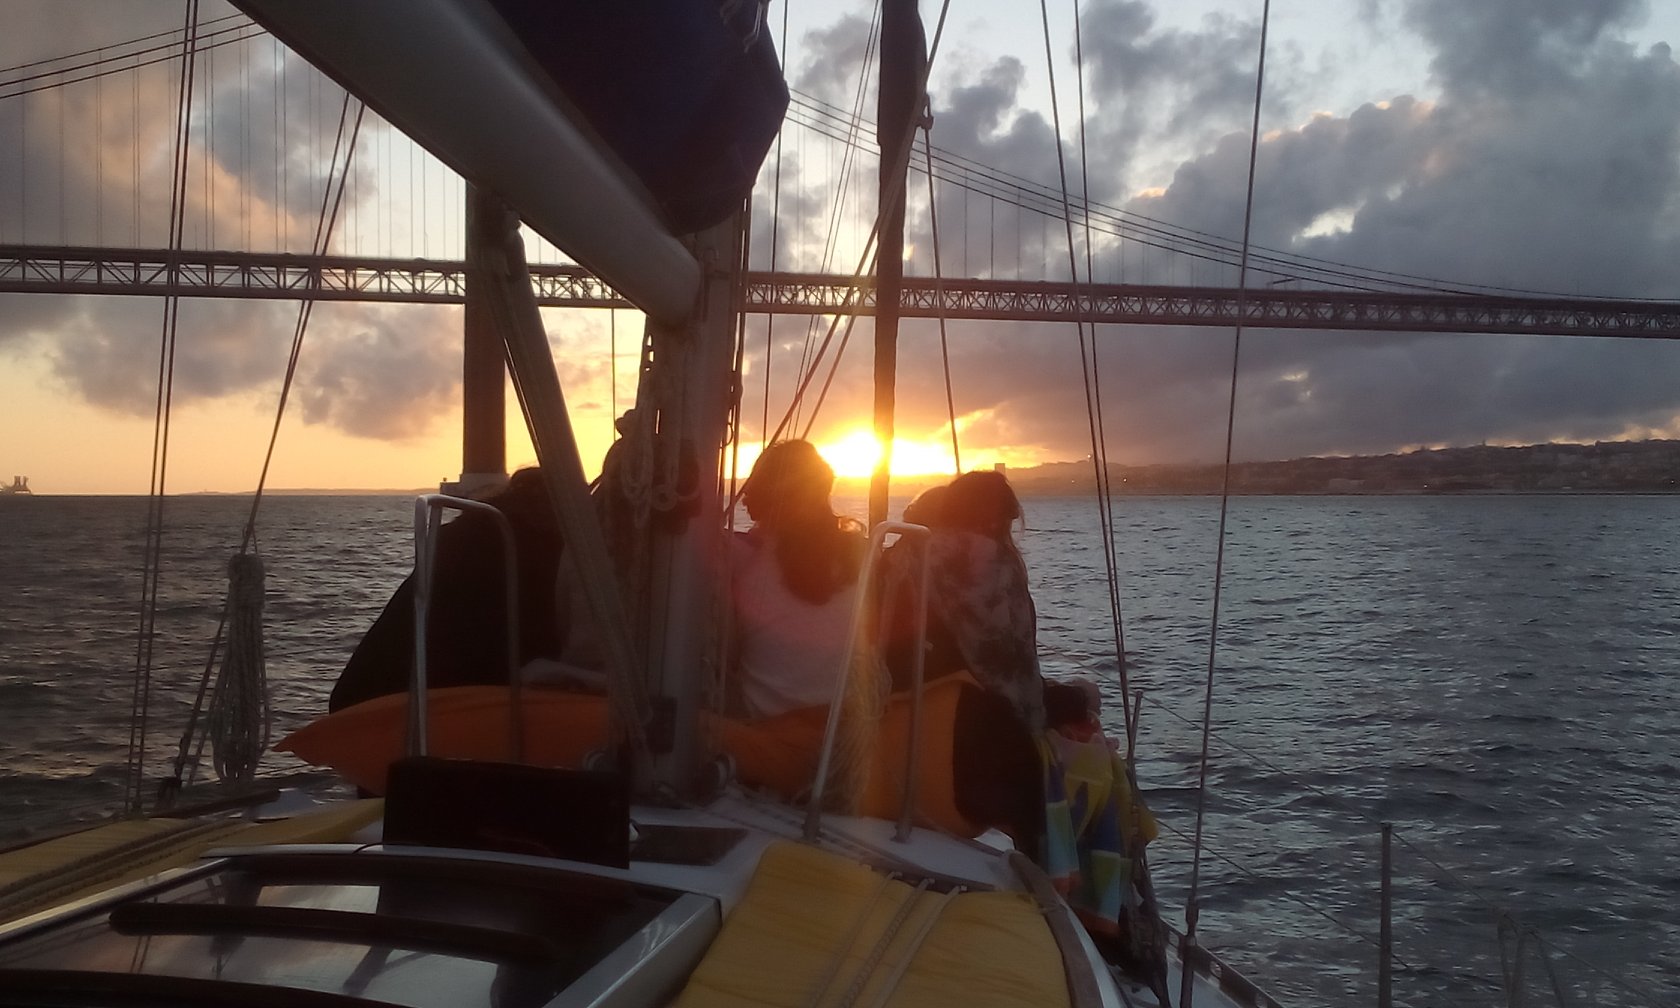 we’ve been receiving a lot of requests for boat tours for groups in Lisbon. To give you an idea of the possibilities, we’ve chosen the best boat tours for groups in Lisbon.